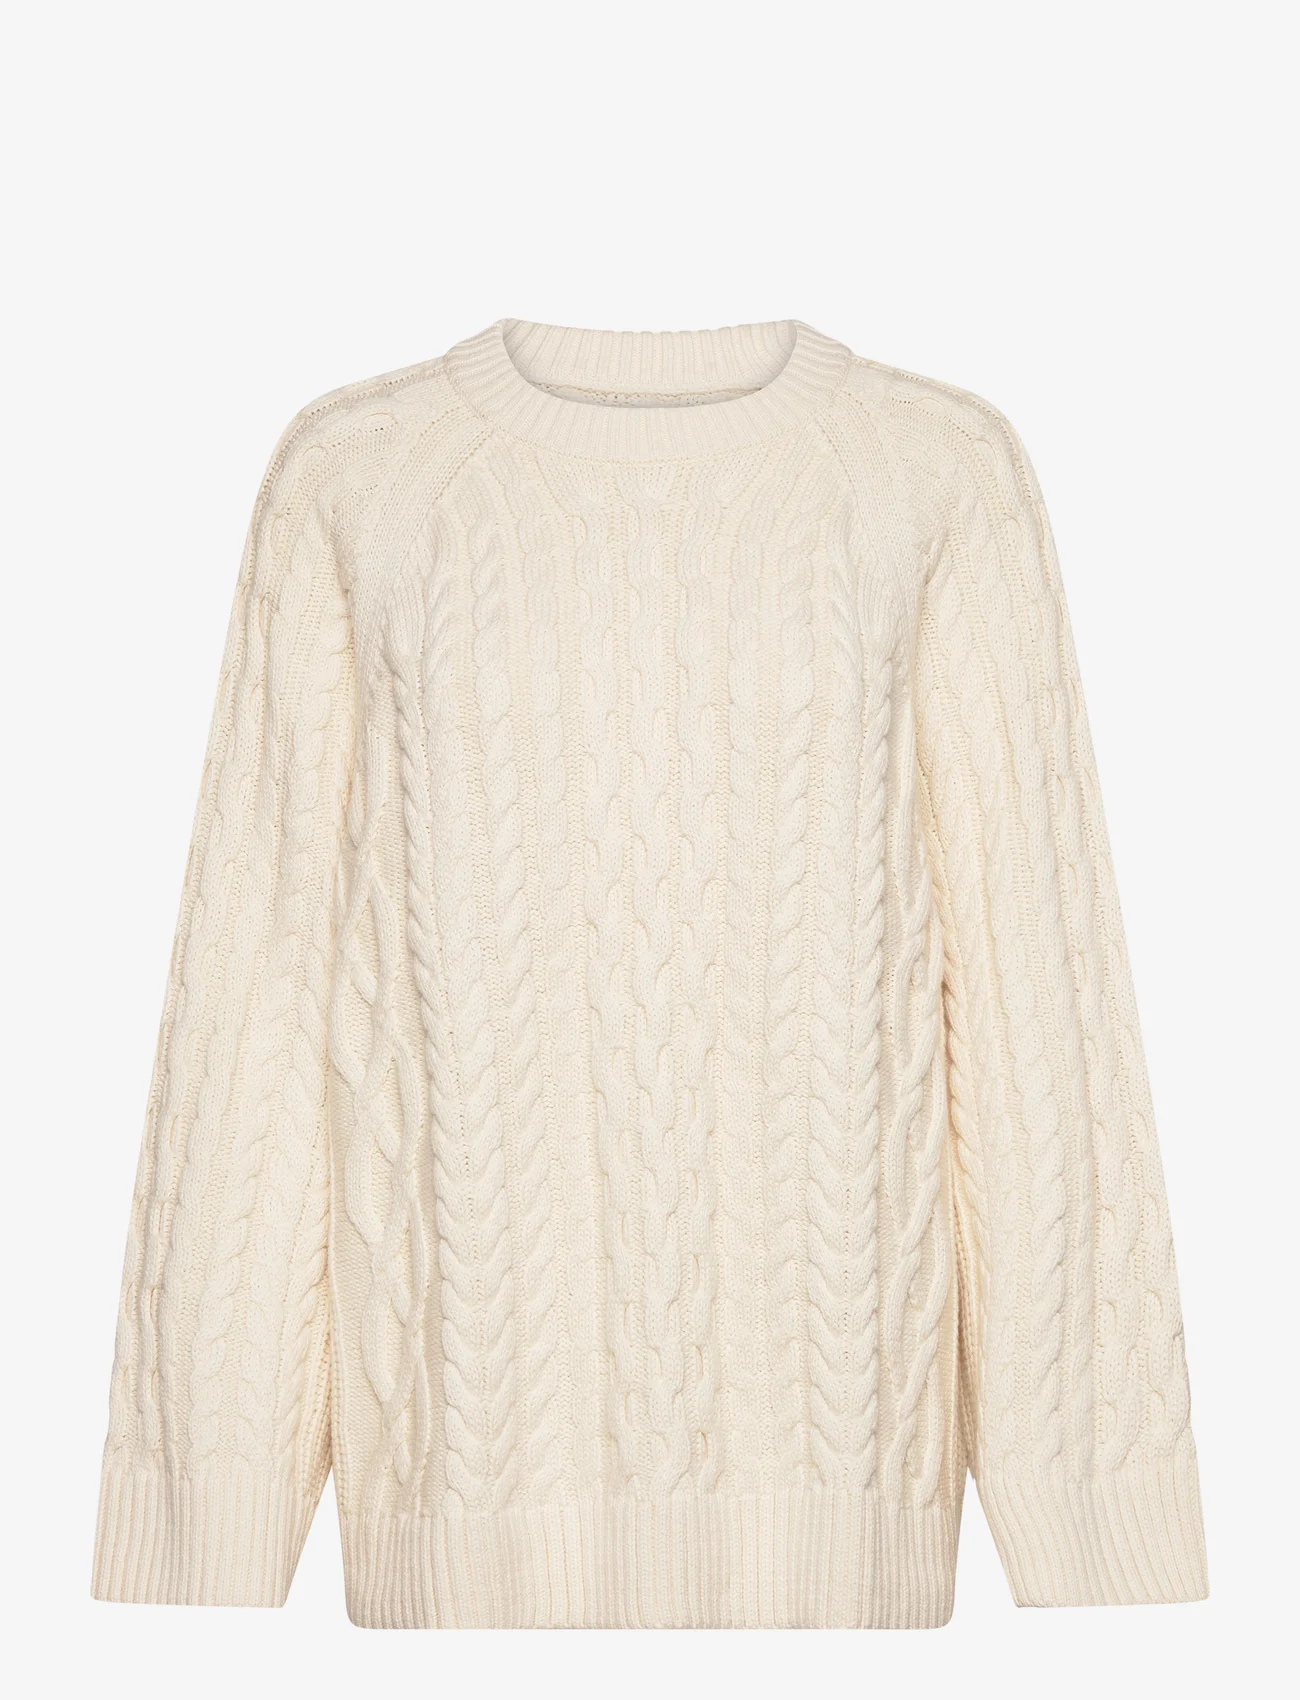 GANT - OVERSIZED CABLE KNIT C-NECK - jumpers - cream - 0